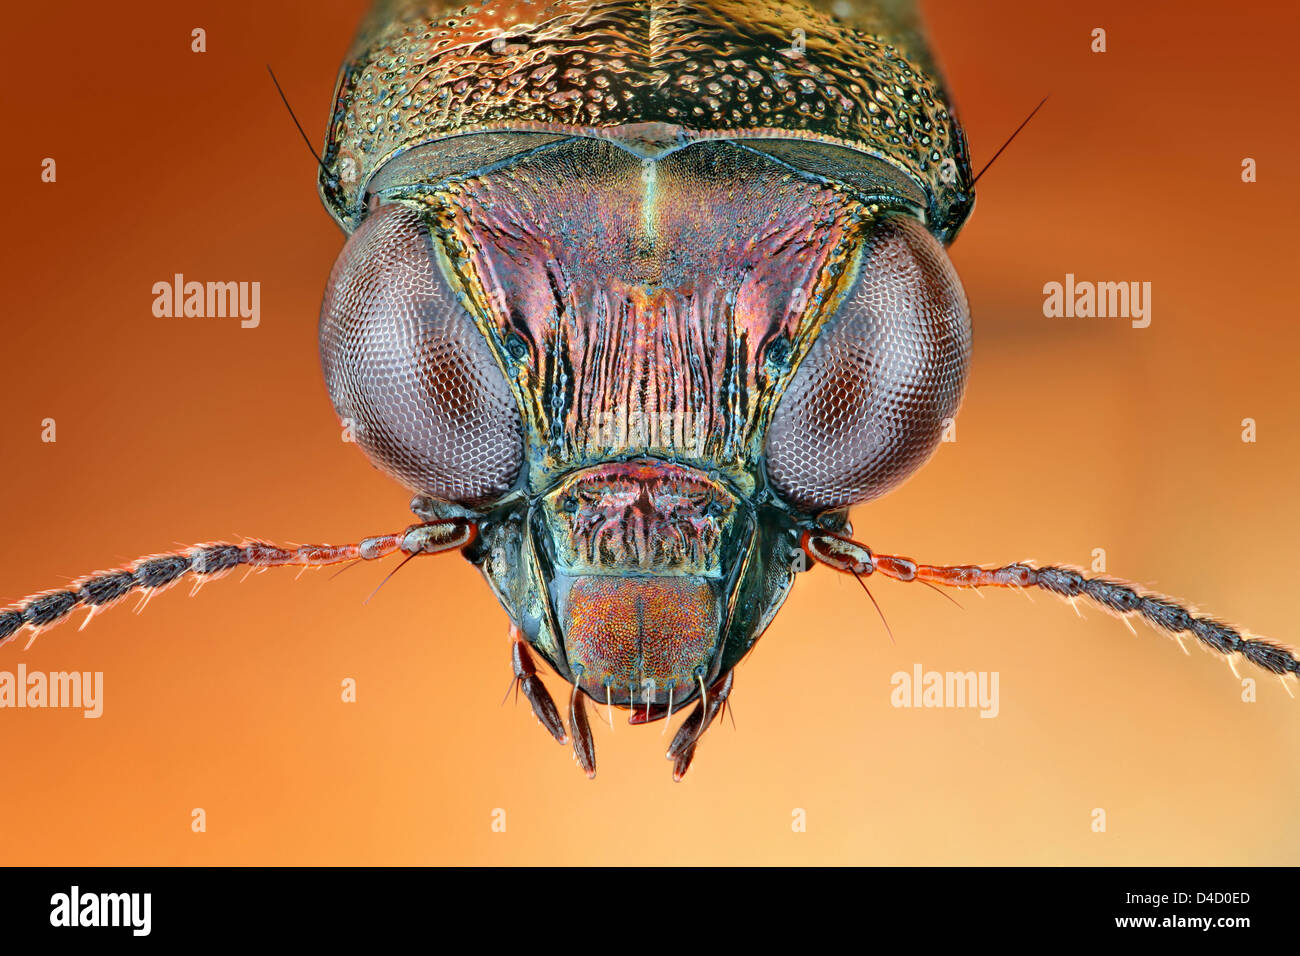 Head of a ground beetle Notiophilus, extreme close-up Stock Photo